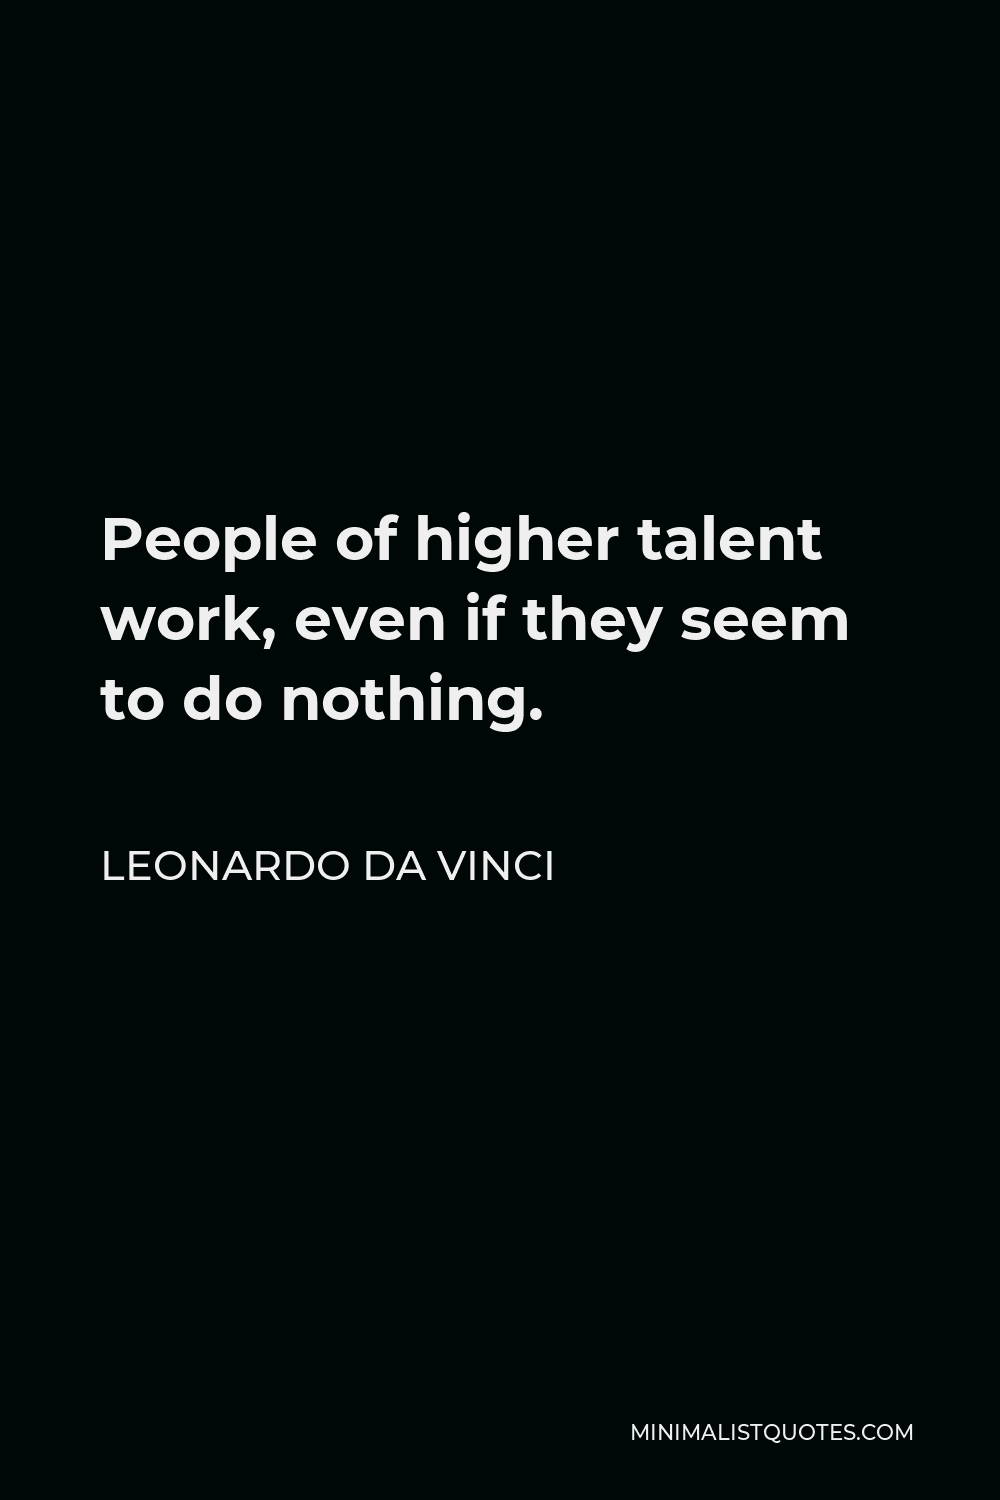 Leonardo da Vinci Quote - People of higher talent work, even if they seem to do nothing.